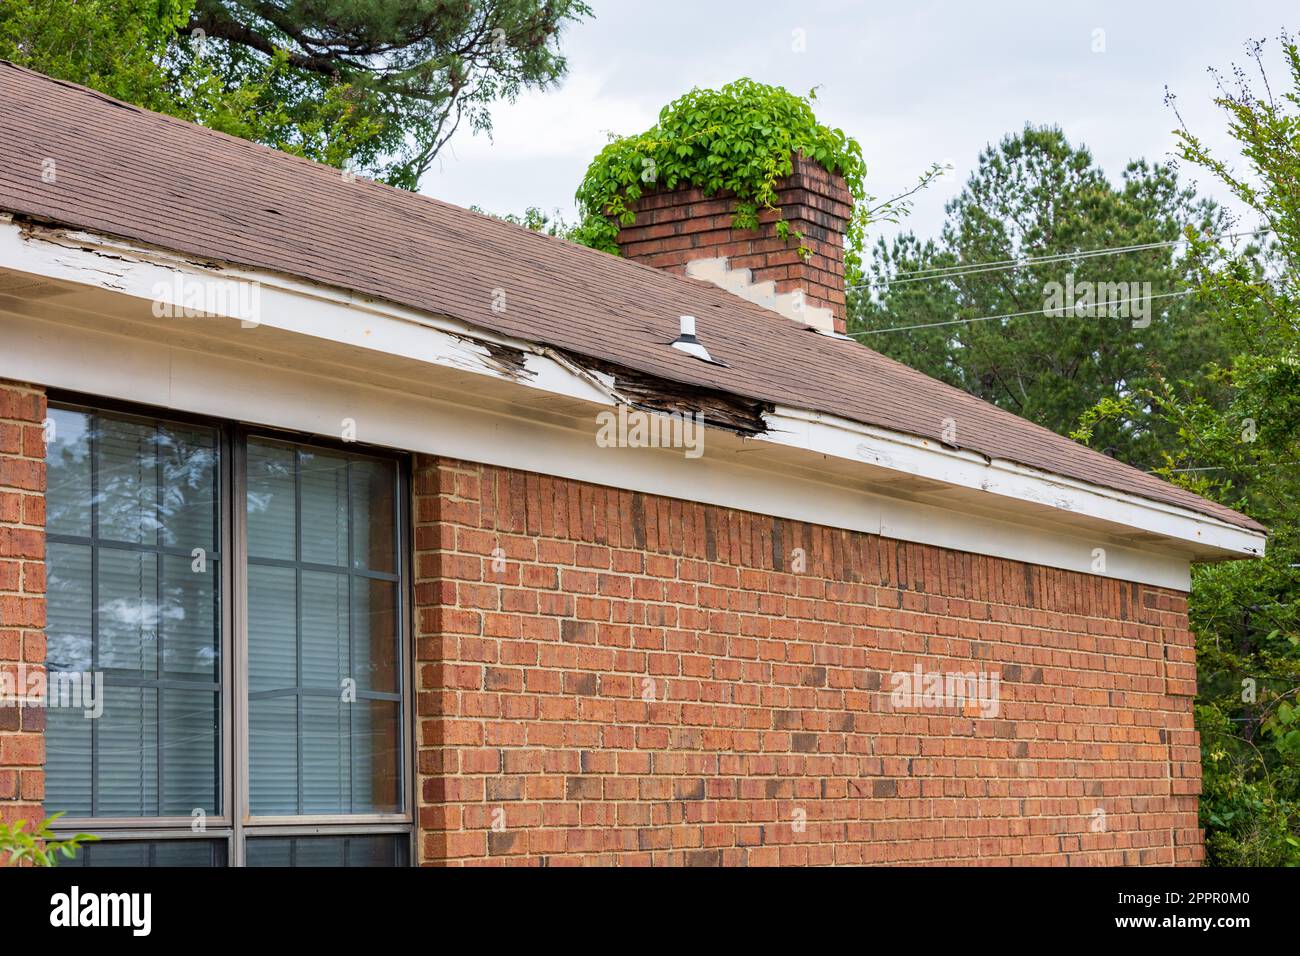 Roof and Fascia board damaged from water and neglect Stock Photo